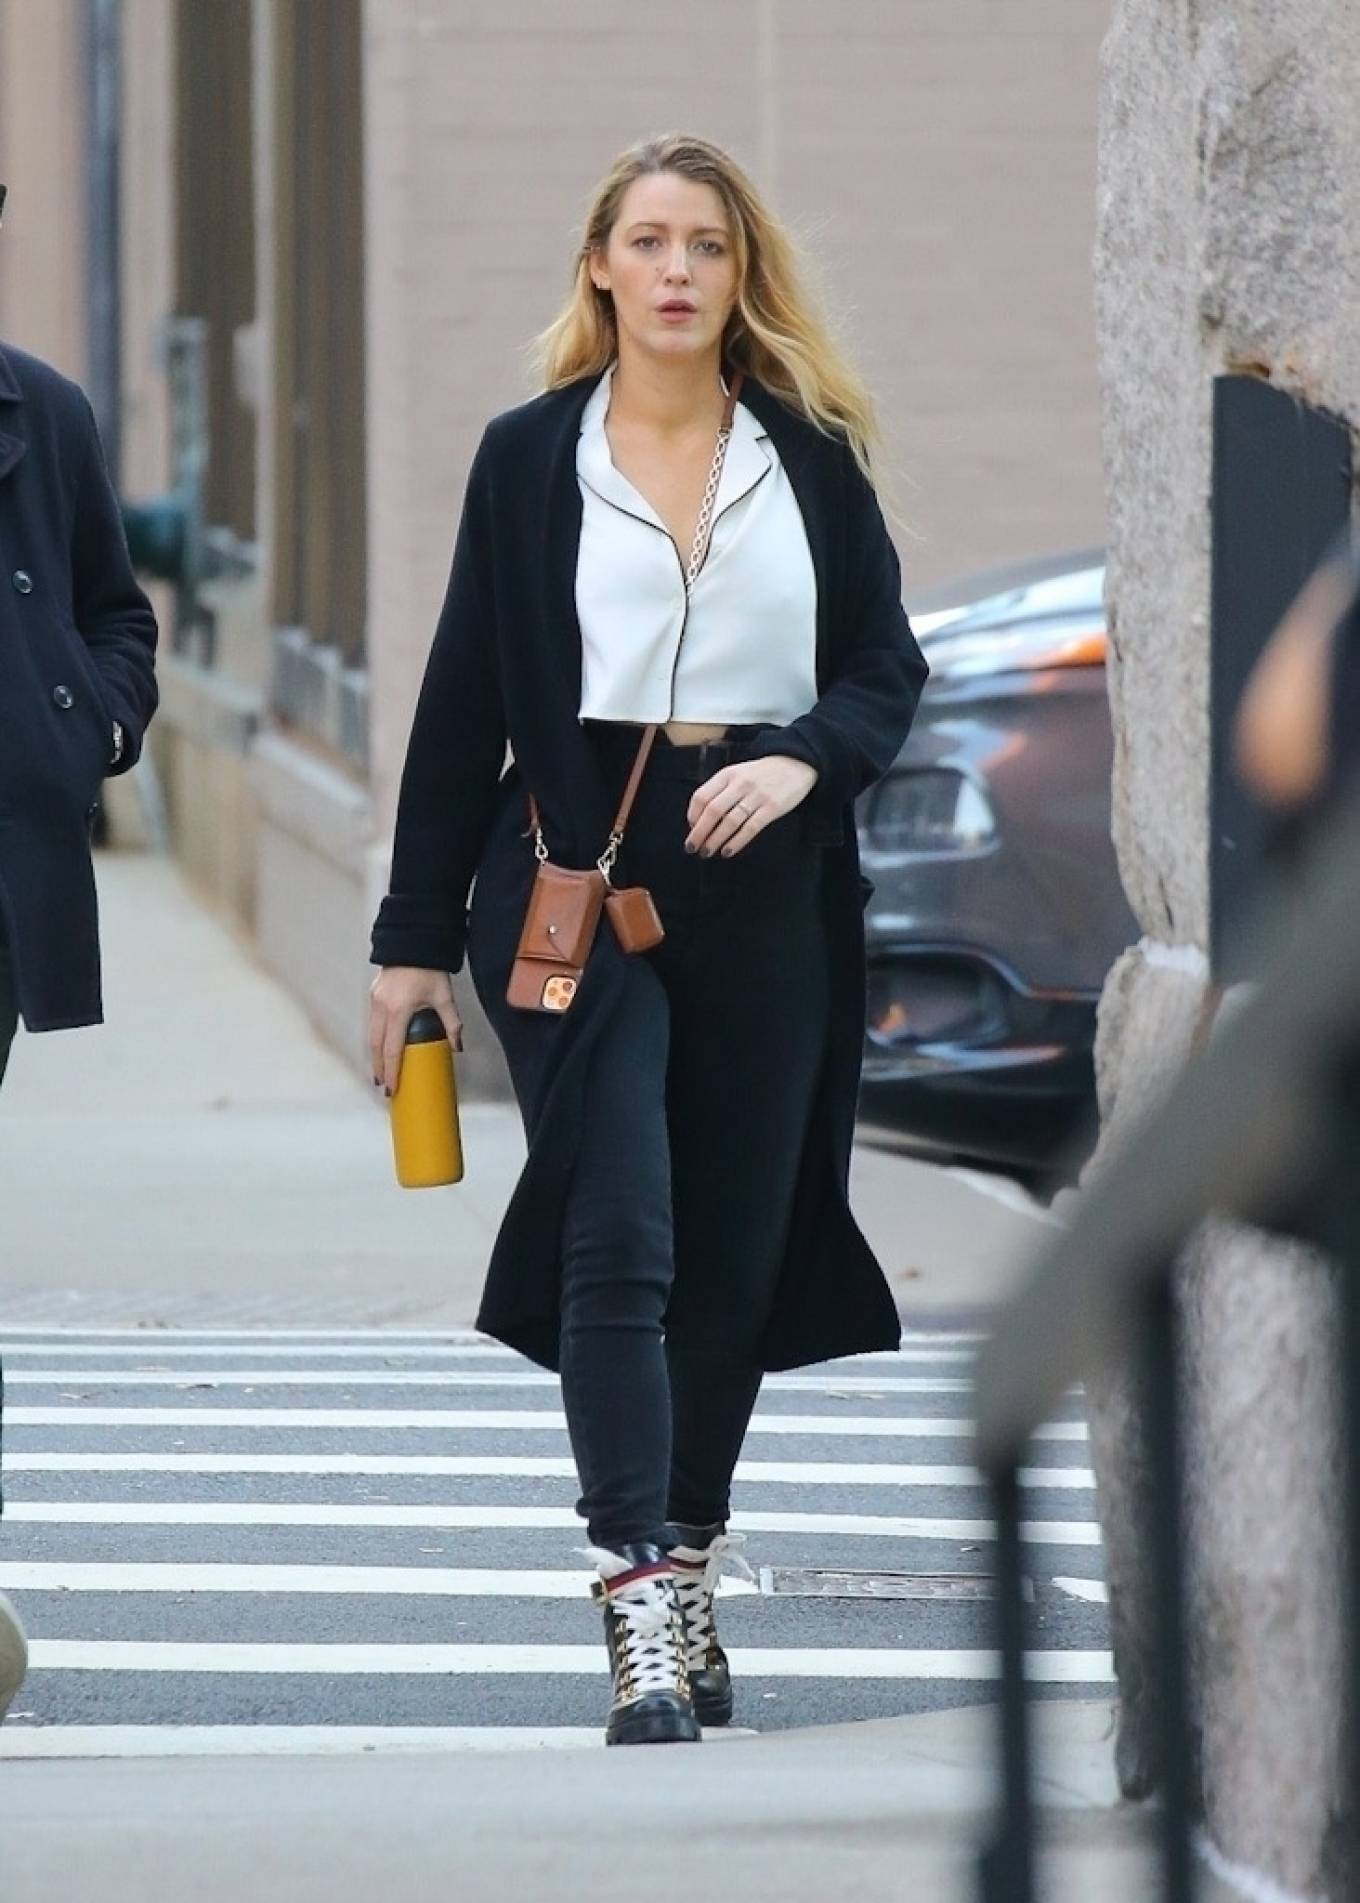 Blake Lively 2021 : Blake Lively – Out for a stroll in NYC-15